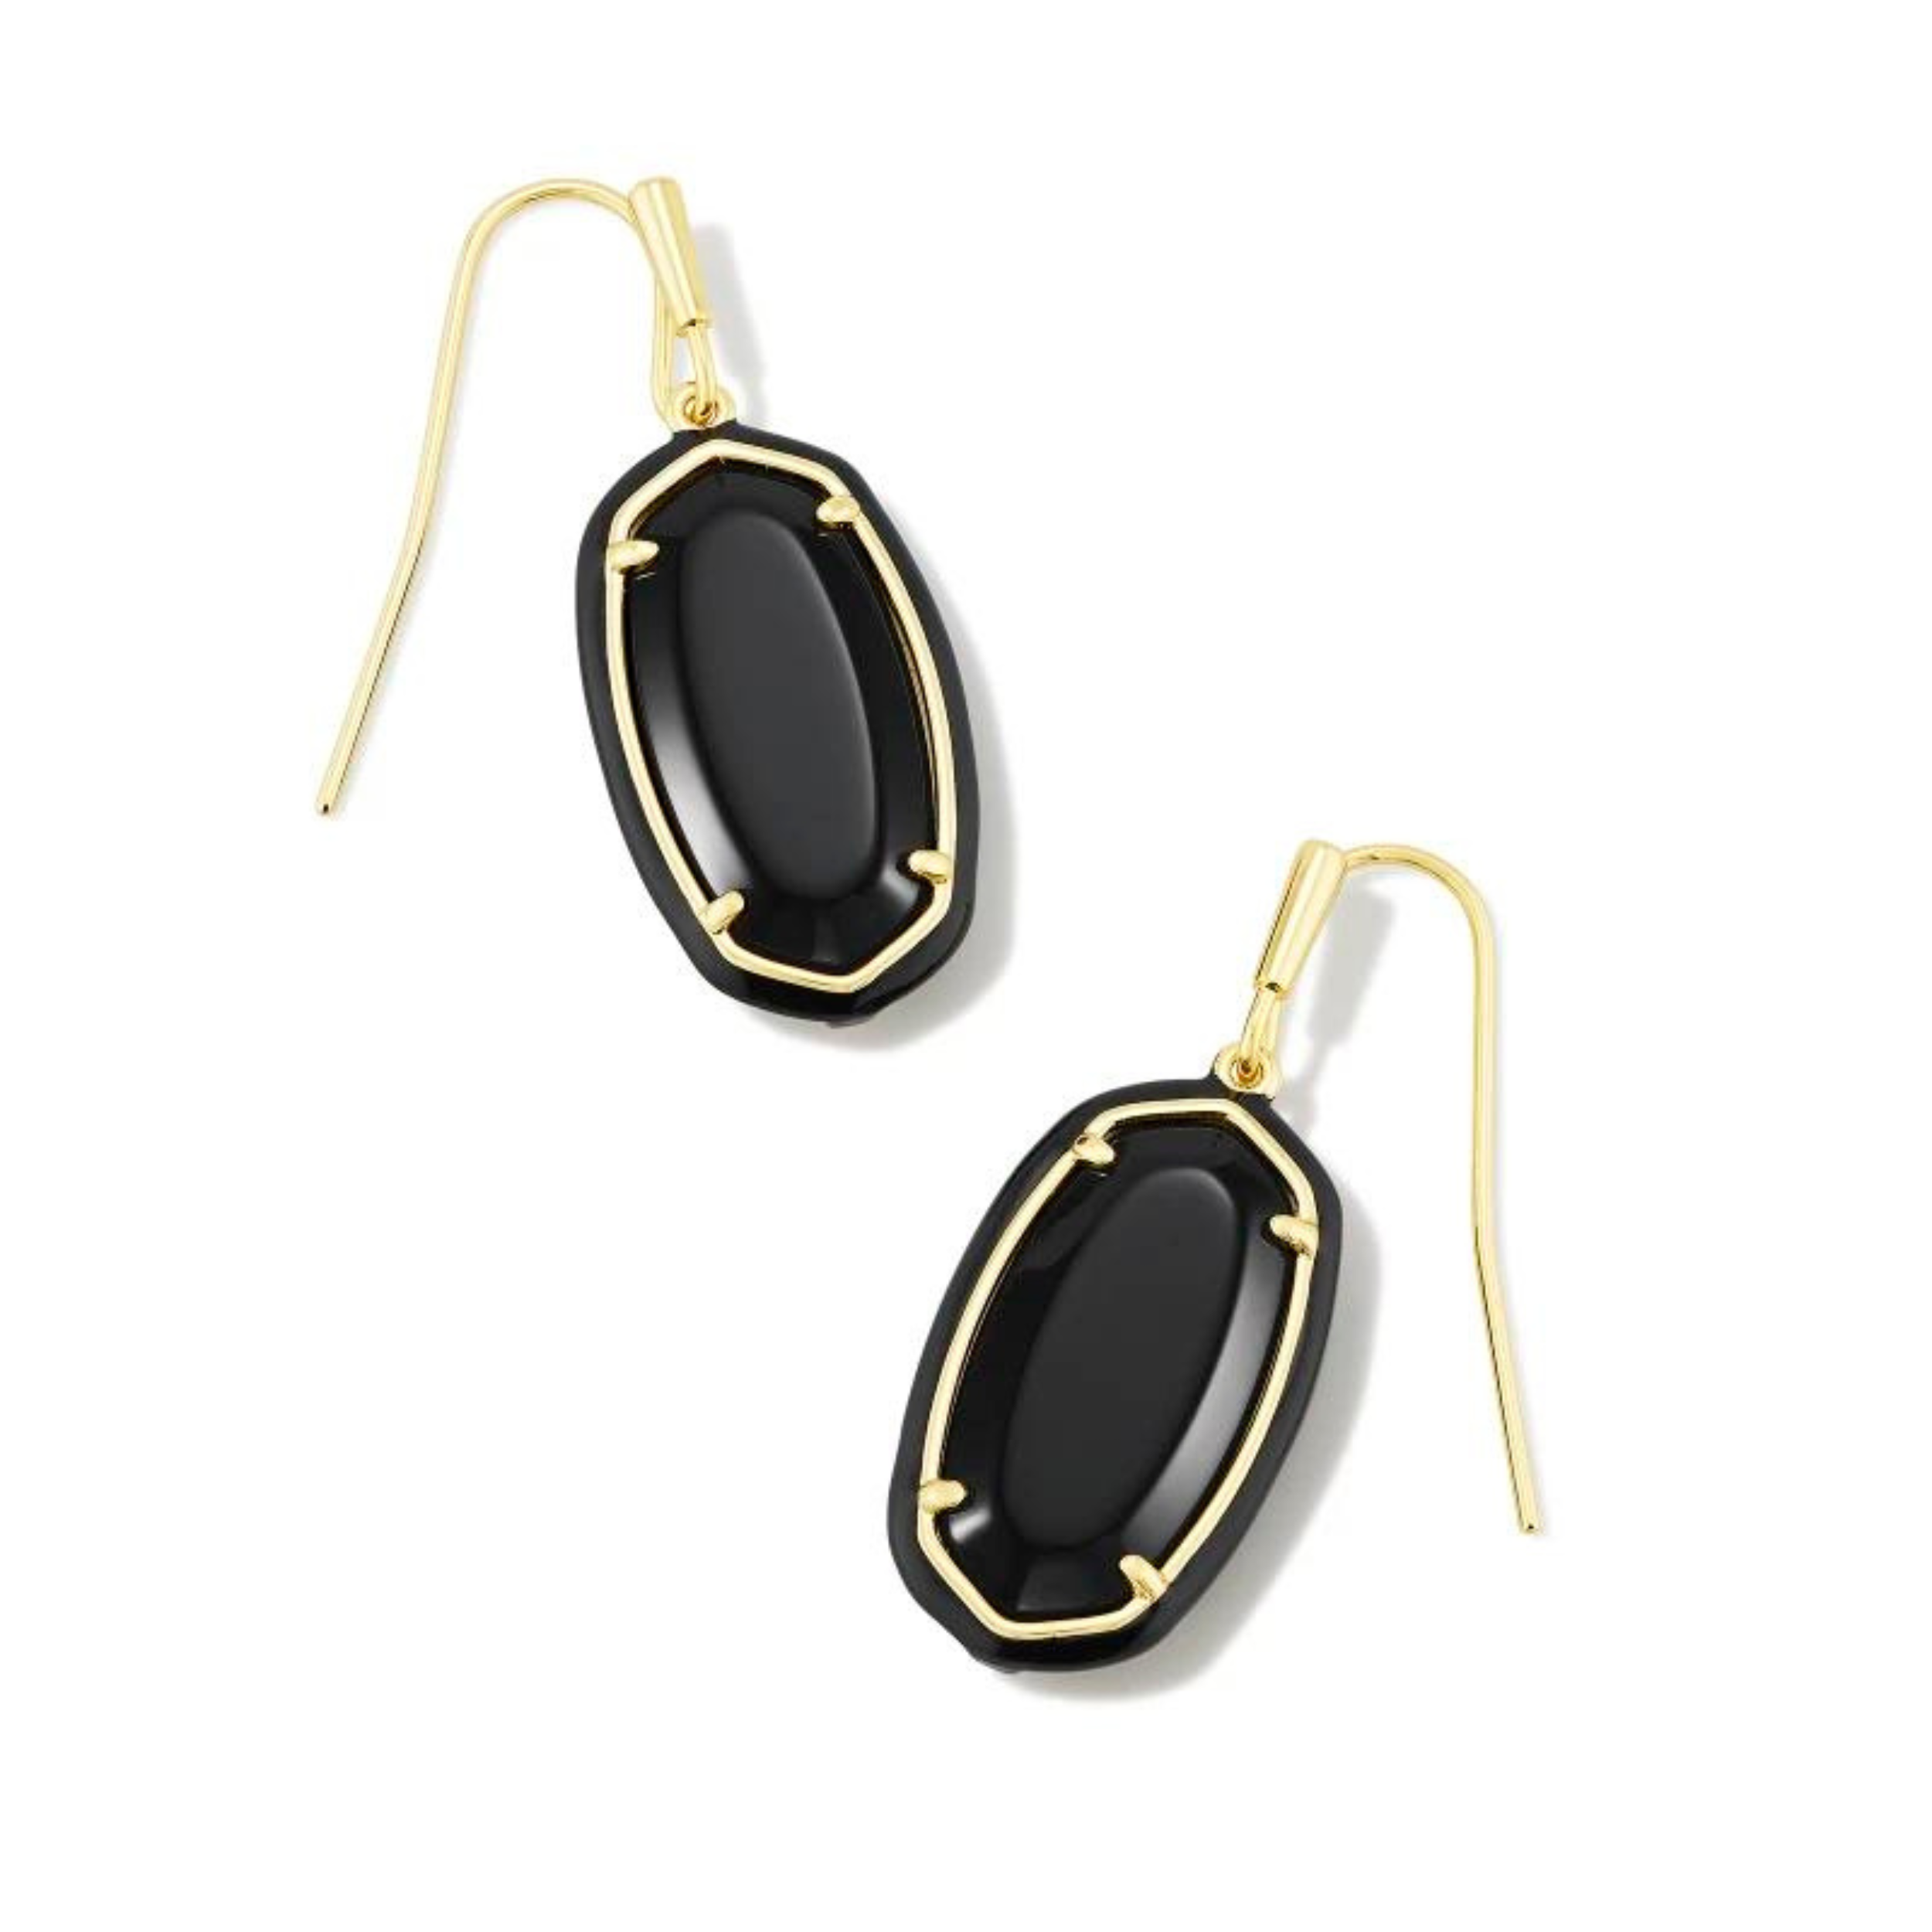 Black framed, oval shaped drop earrings with a center black stone and a gold fish hook earring. These earrings are pictured on a white background. 